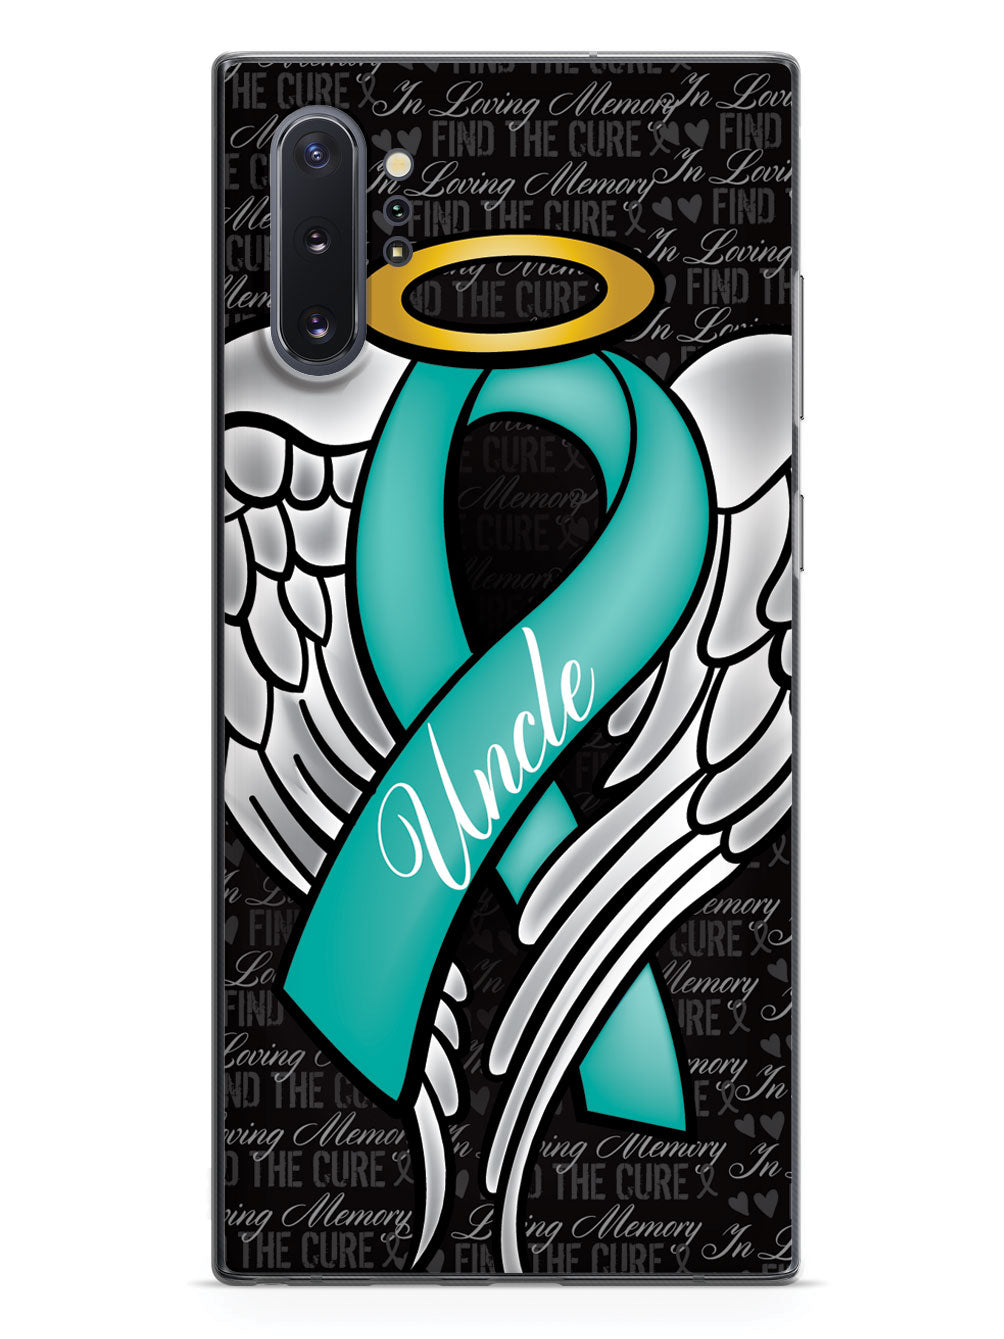 In Loving Memory of My Uncle - Teal Ribbon Case